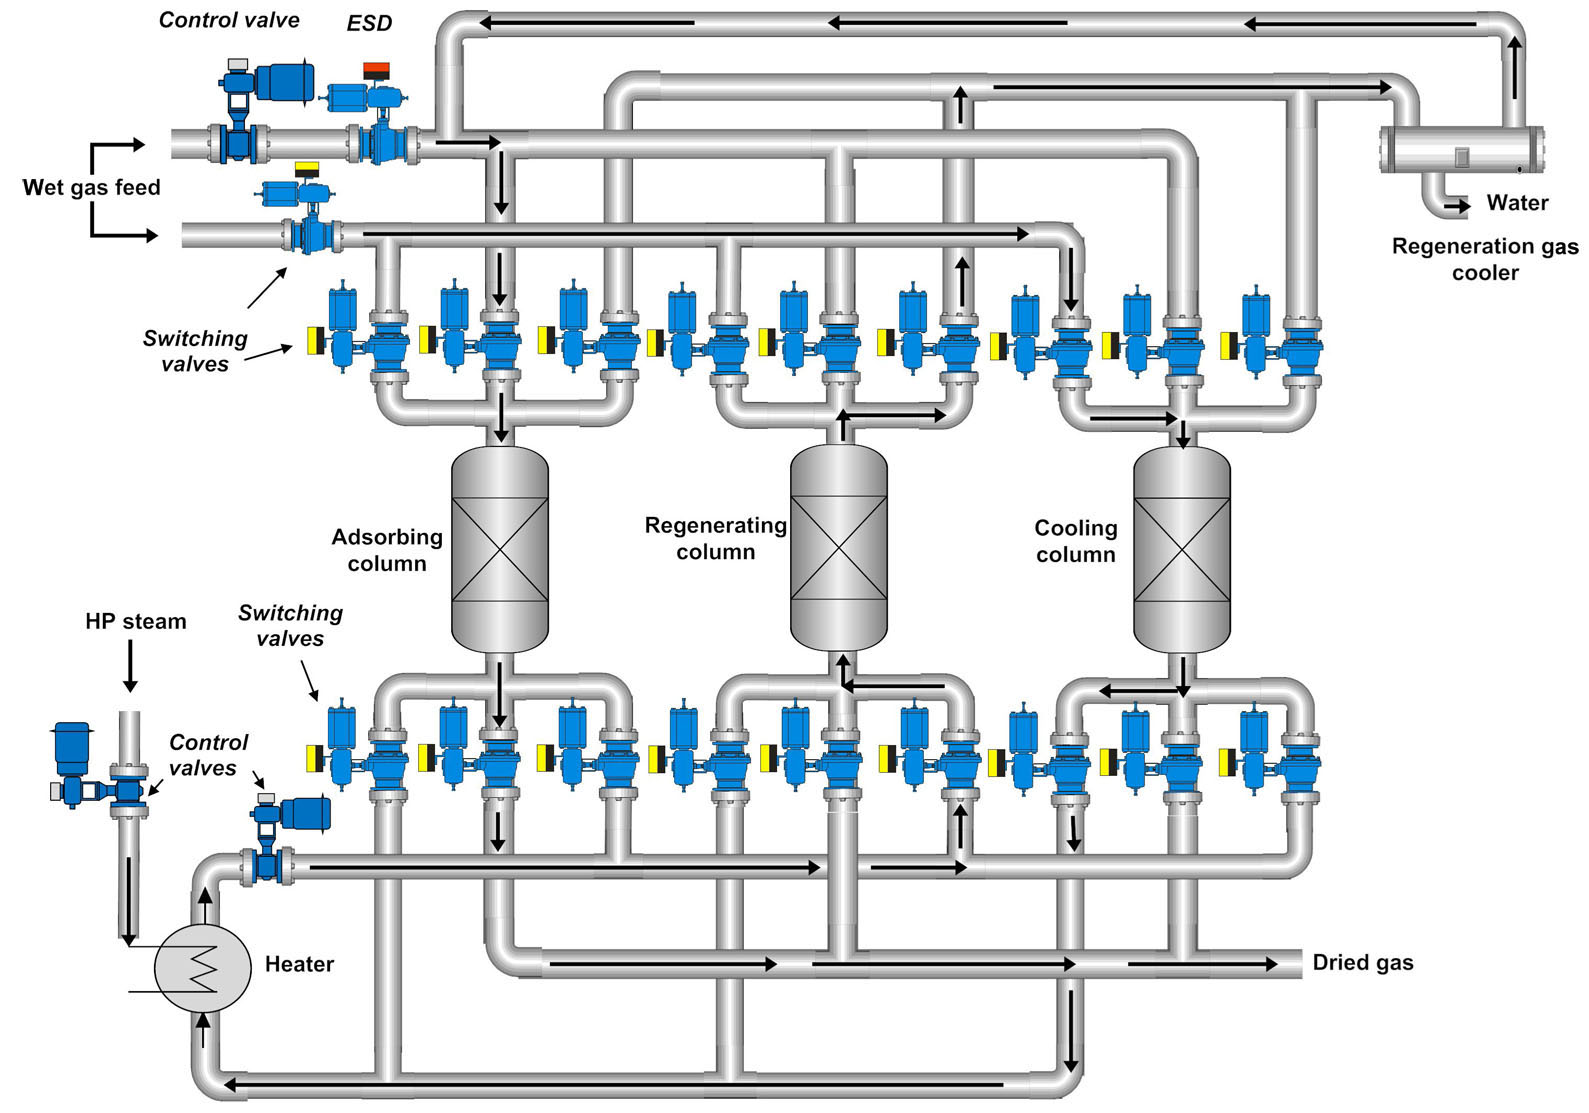 Typical molecular sieving process. (This diagram is only a visual representation, not an actual process flow diagram.)